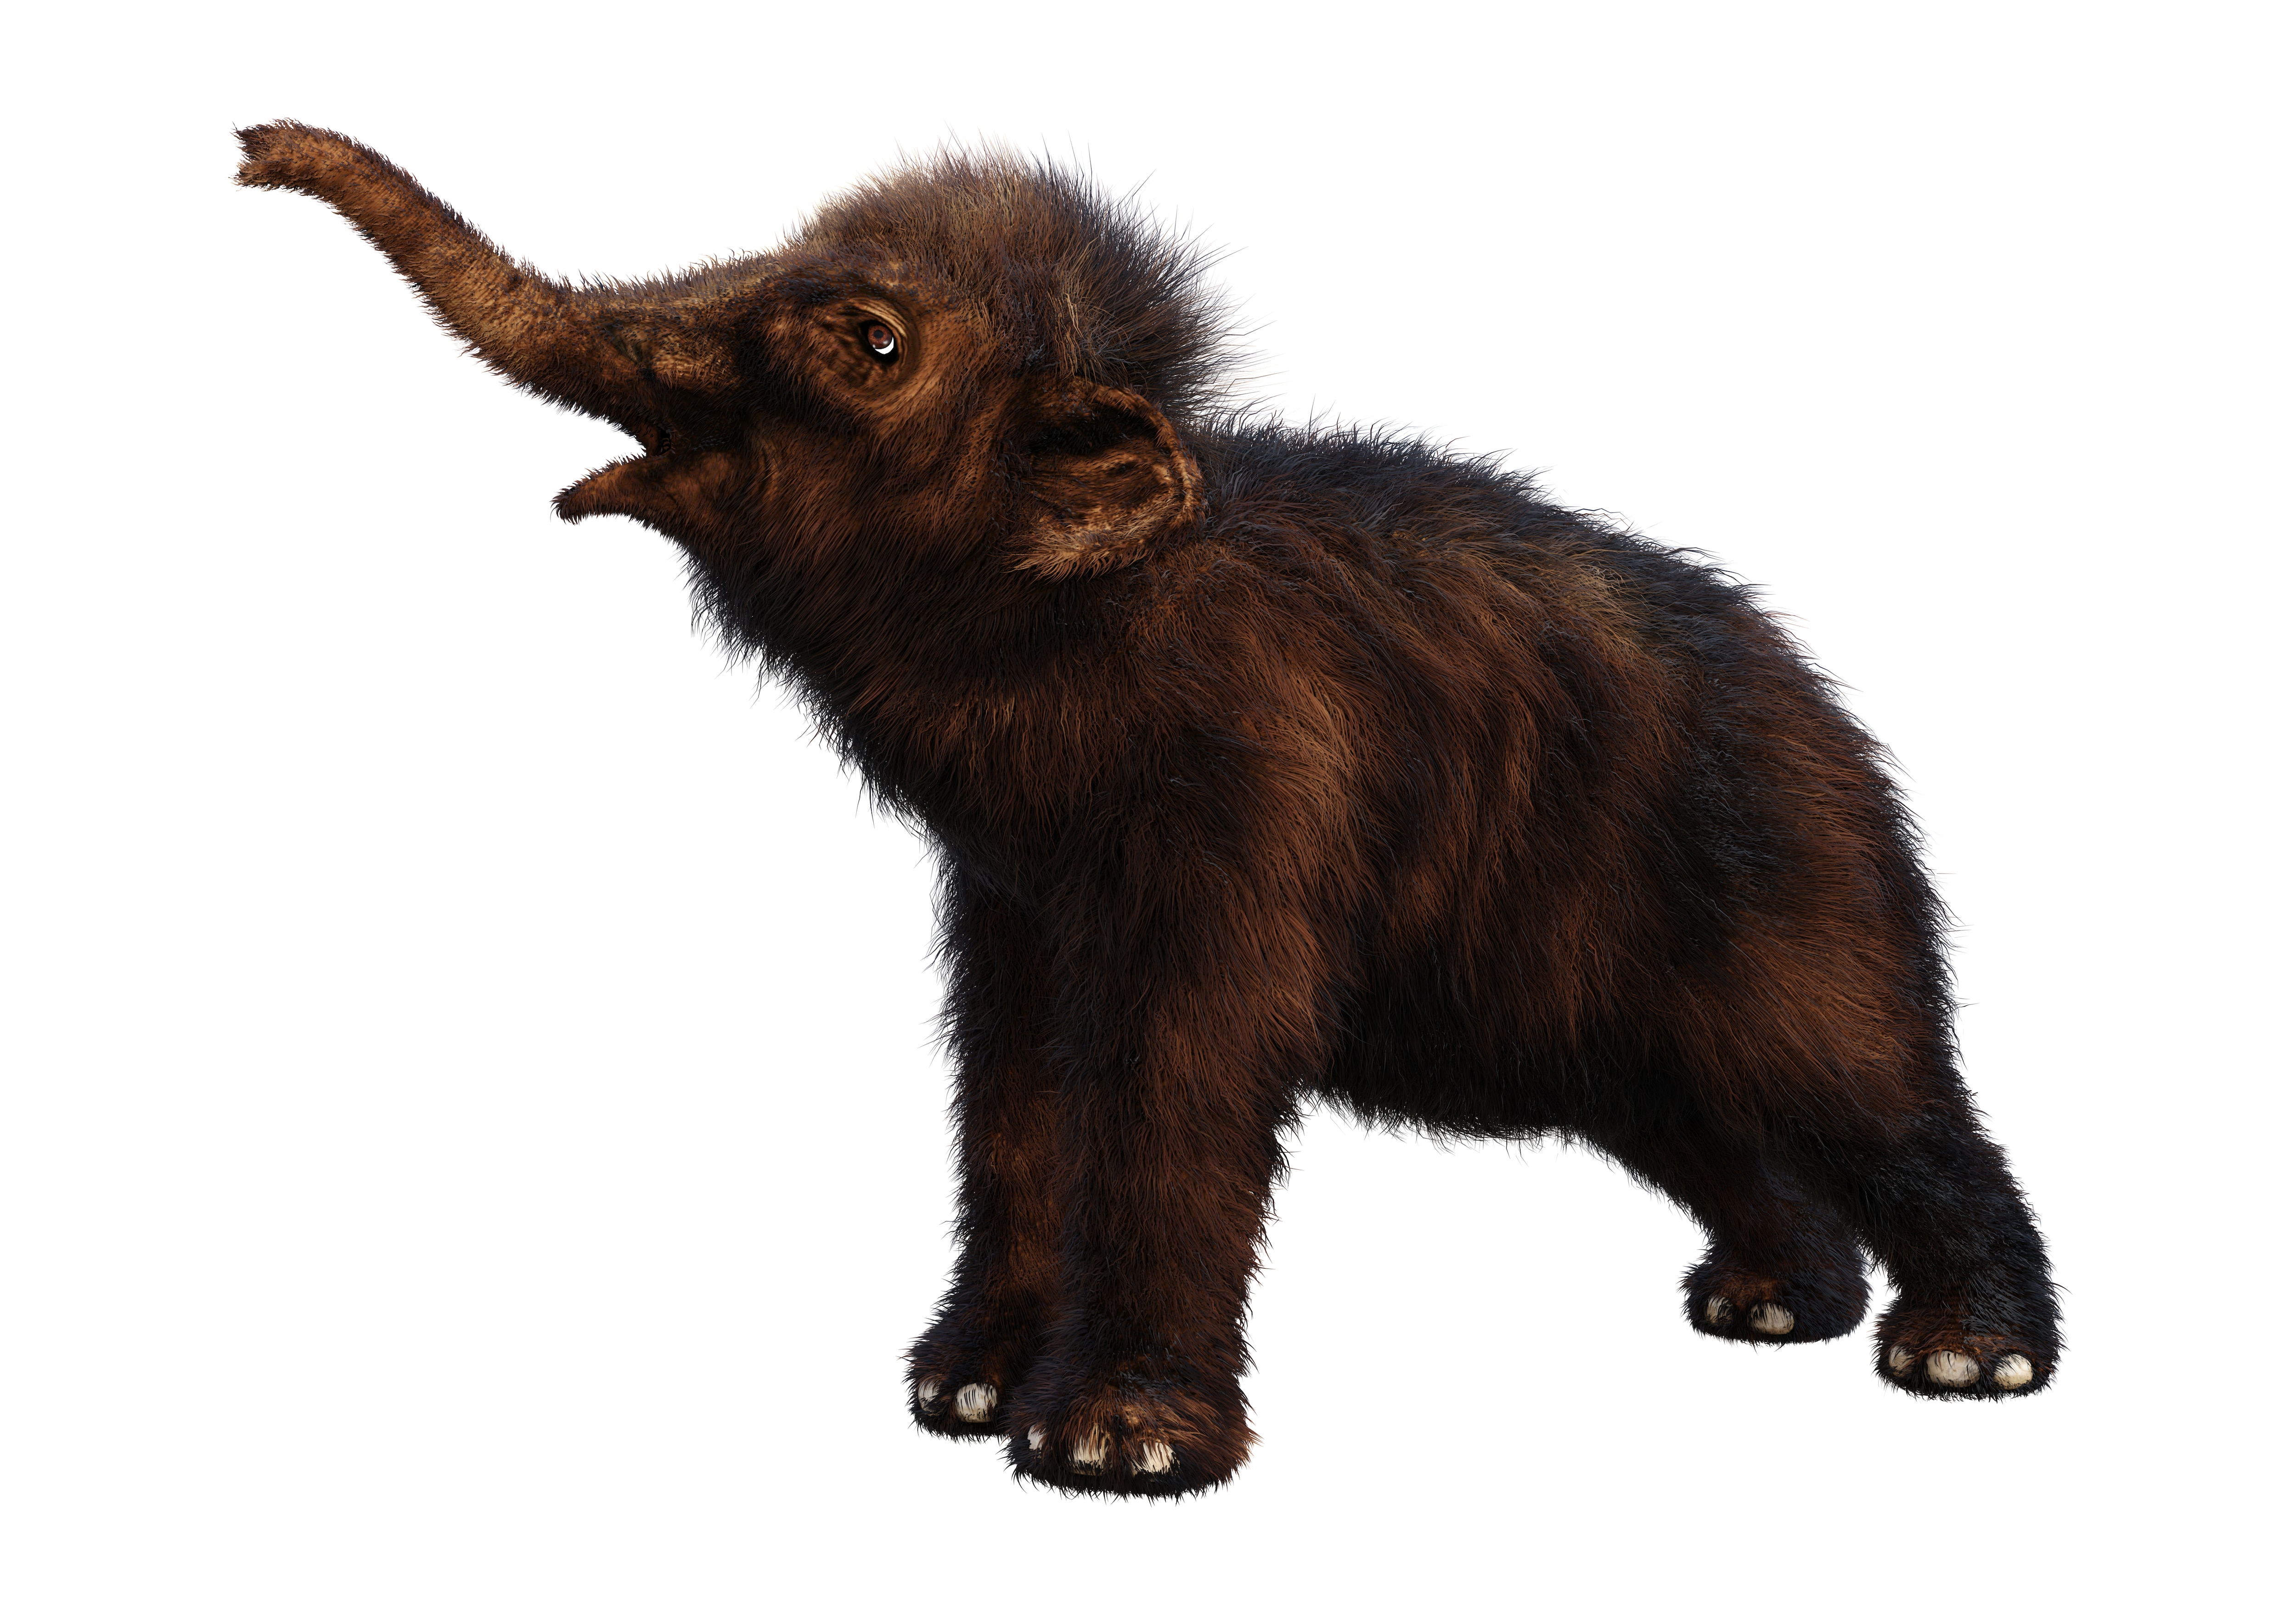 baby woolly mammoth